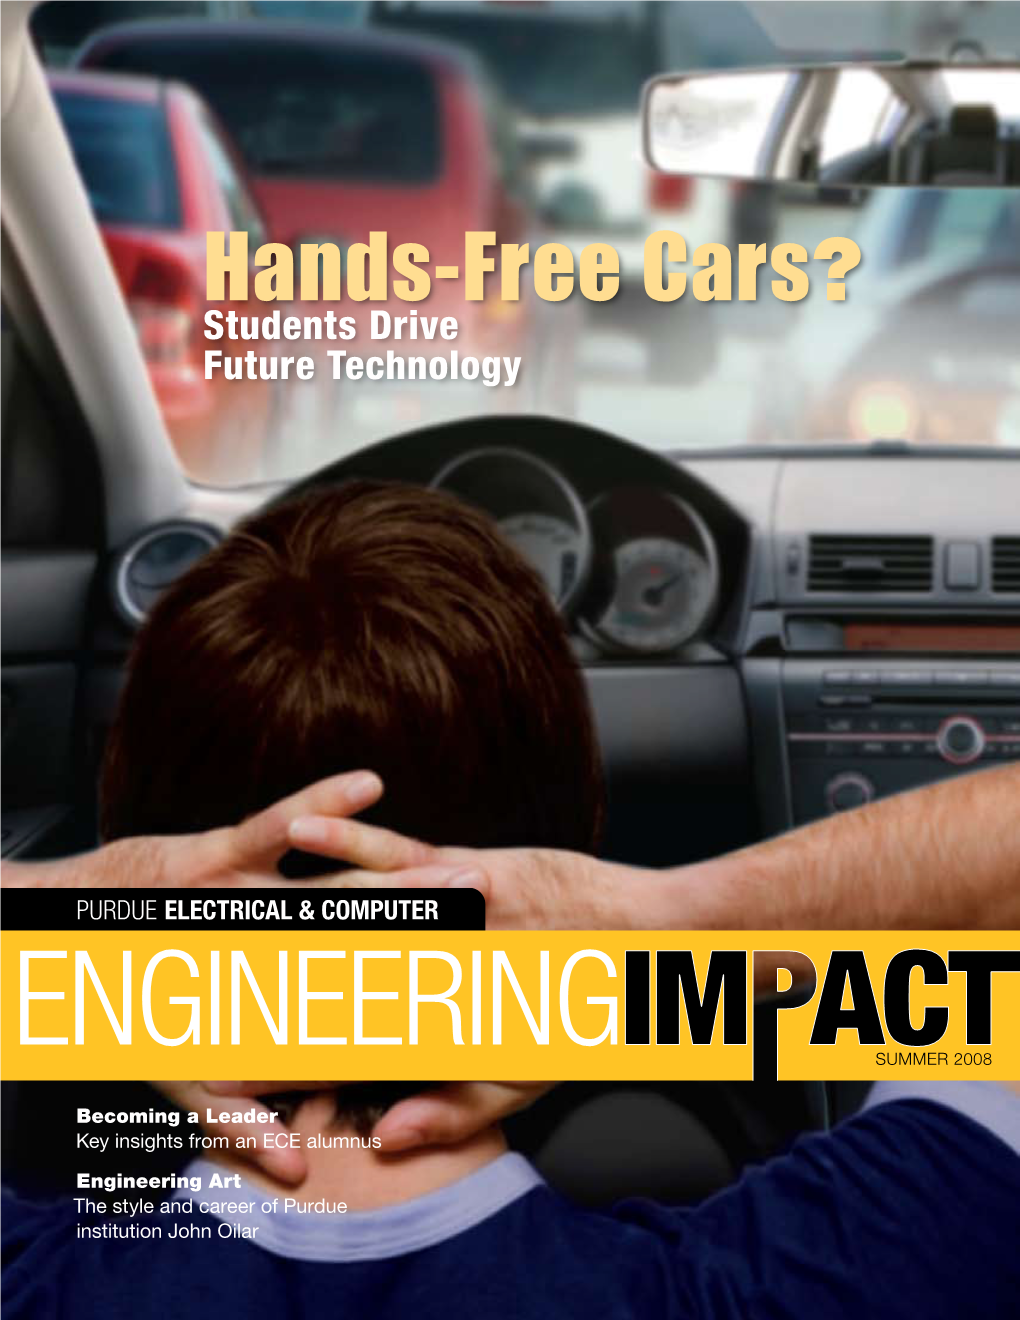 Hands-Free Cars? Students Drive Future Technology